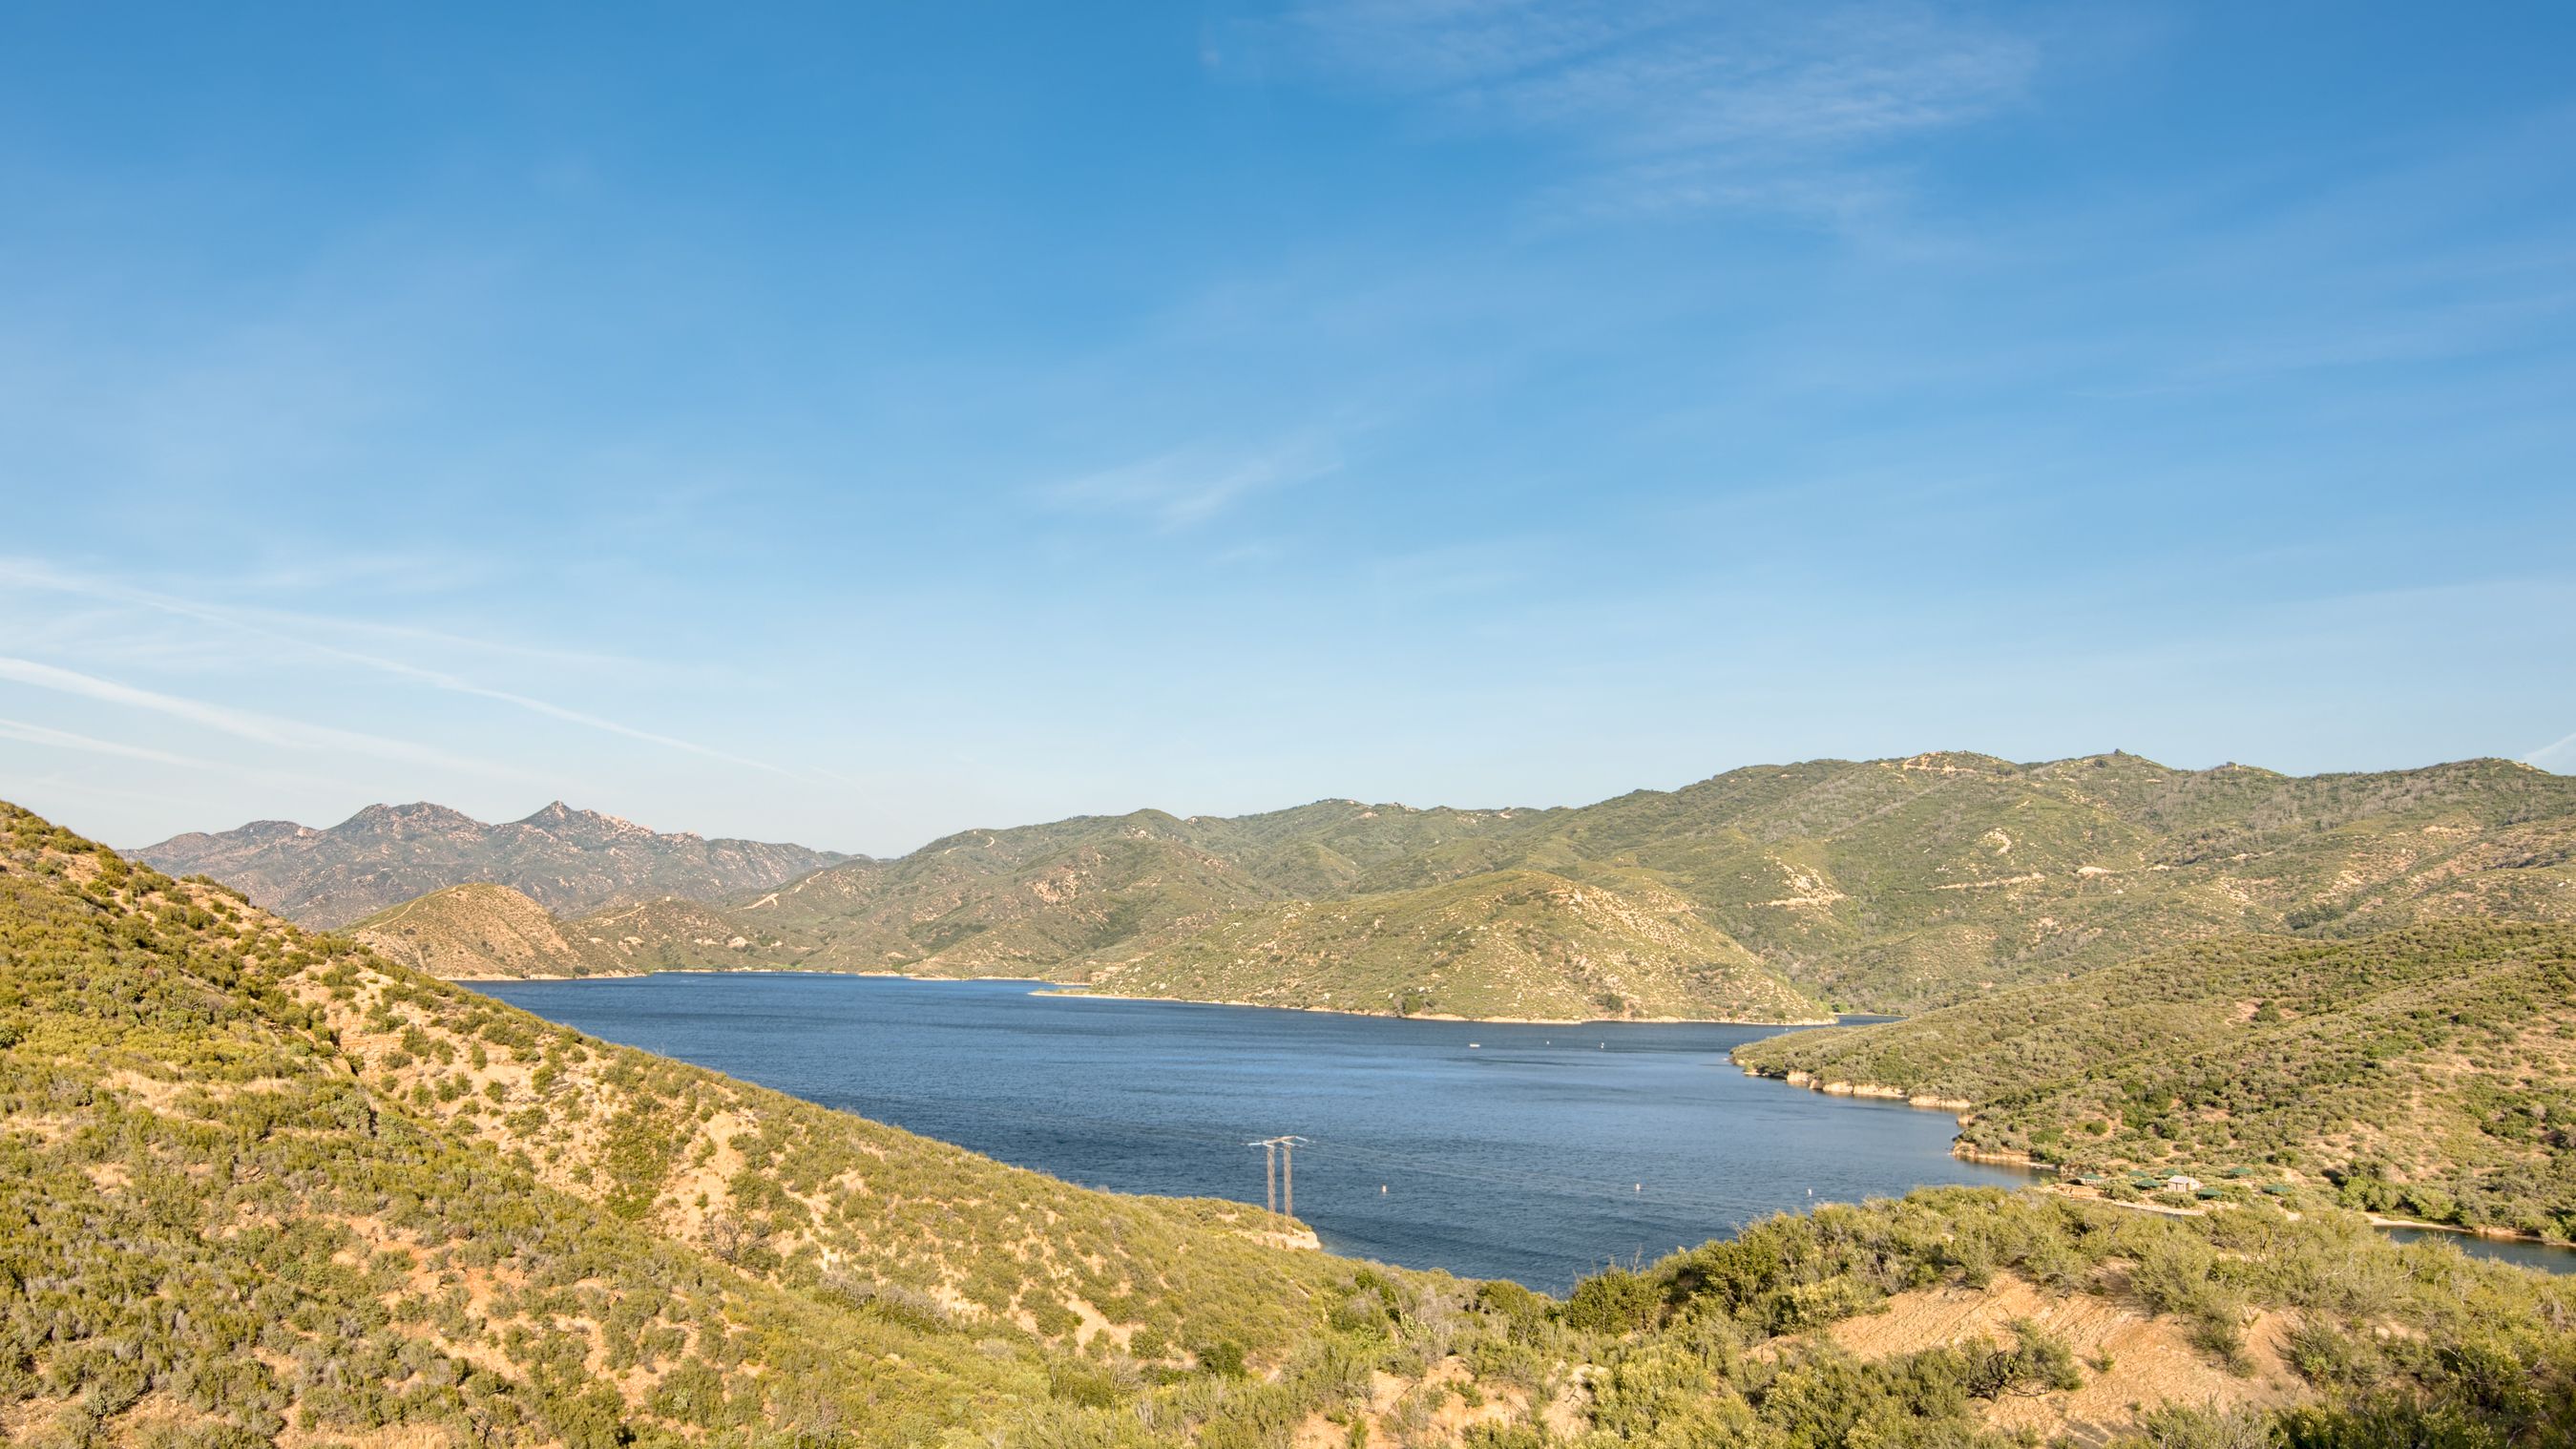 Silverwood Lake Overlook do Rim of the World Scenic Byway